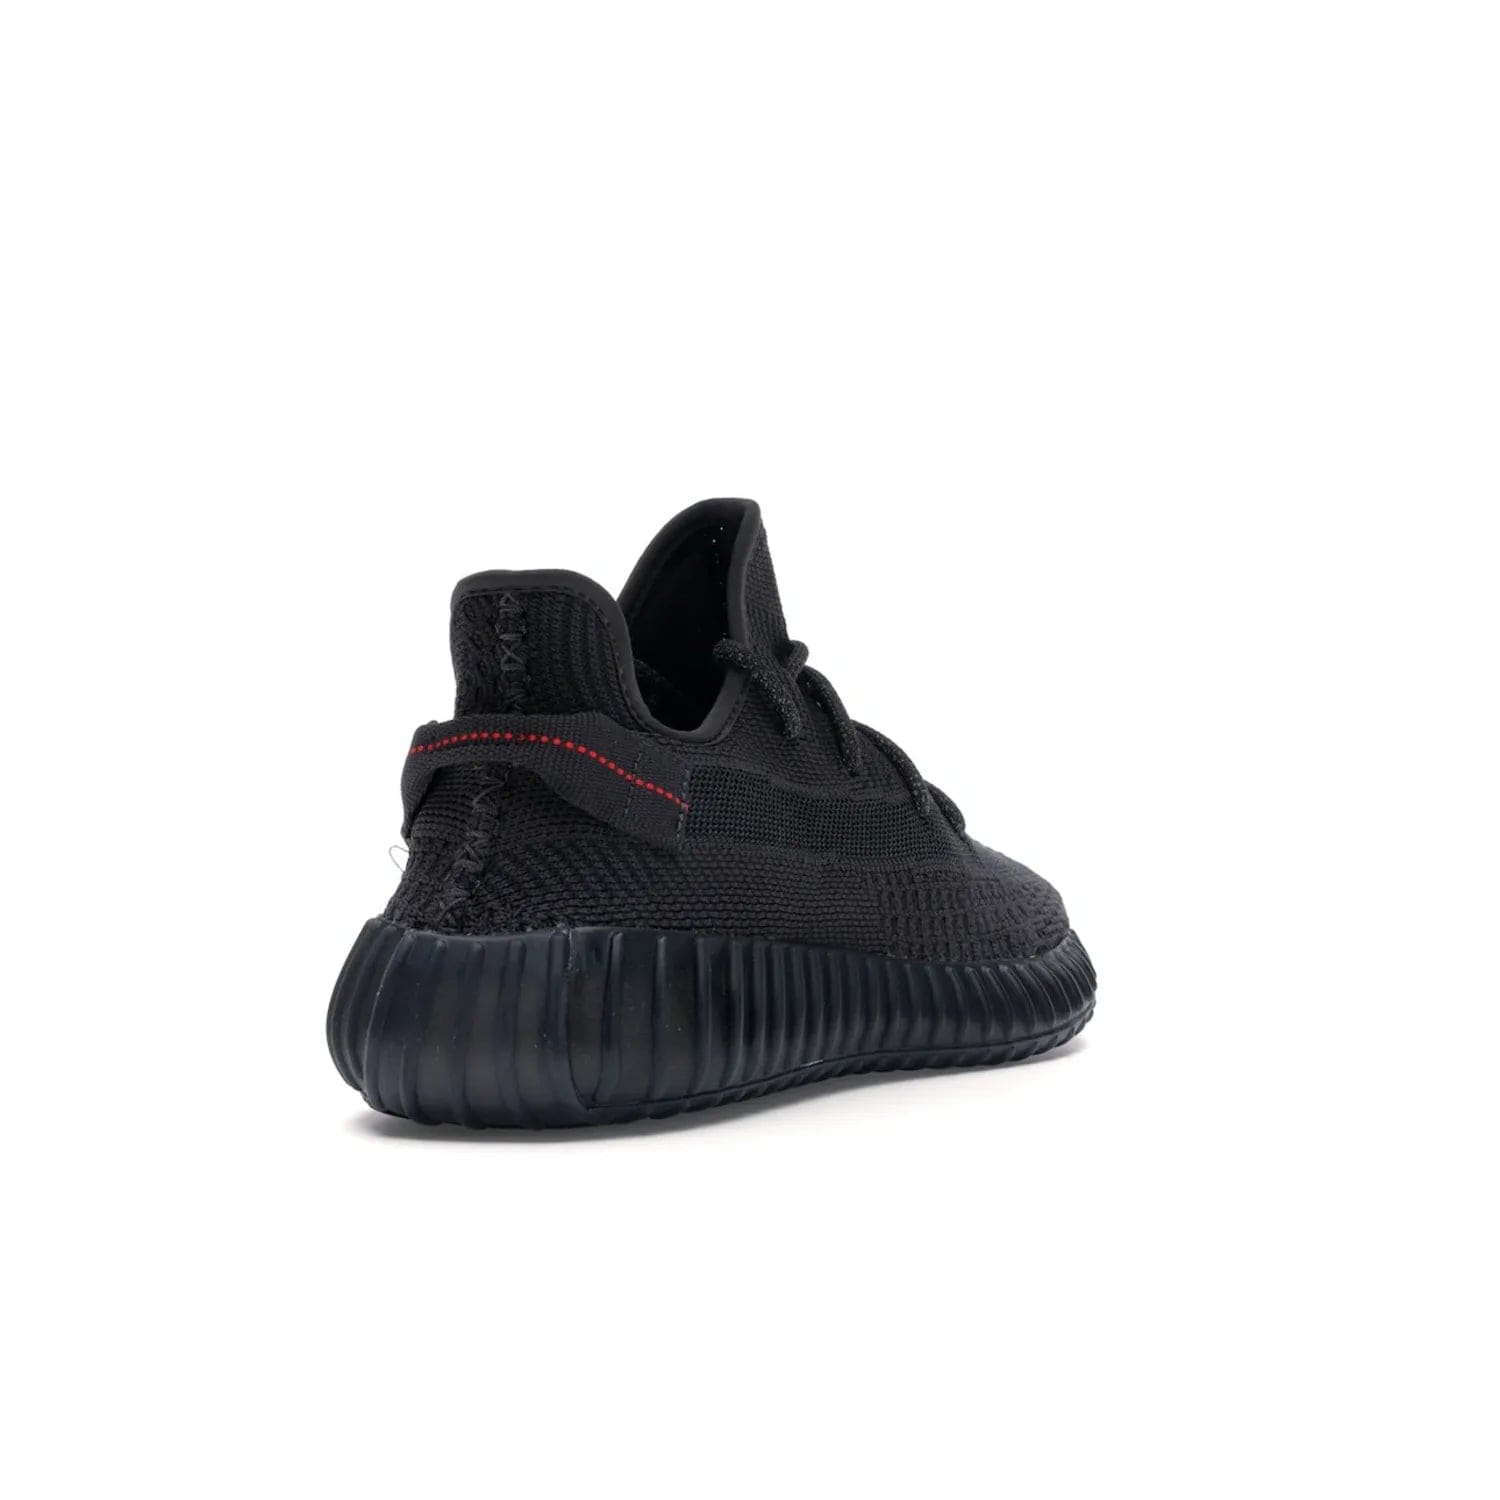 adidas Yeezy Boost 350 V2 Black (Non-Reflective) - Image 31 - Only at www.BallersClubKickz.com - A timeless, sleek silhouette crafted from quality materials. The adidas Yeezy Boost 350 V2 Black (Non-Reflective) brings style and sophistication. Get yours now!